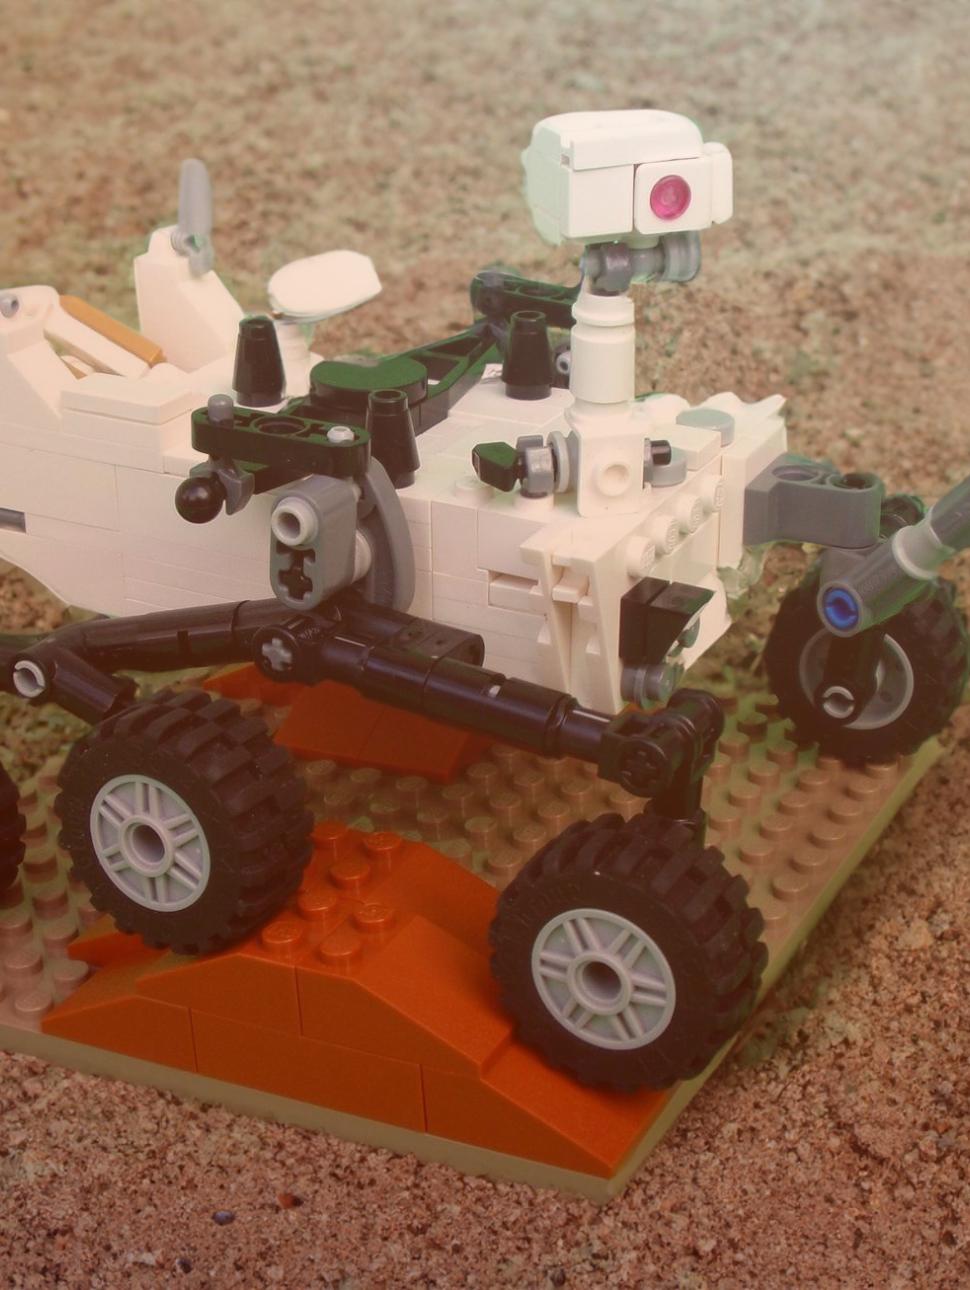 a small planeta lander is made out of lego block pieces mostly white pieces and has six sets of wheels driving over terrain which hs rocky and sandy. there is a slightly green and red tinge to the picture